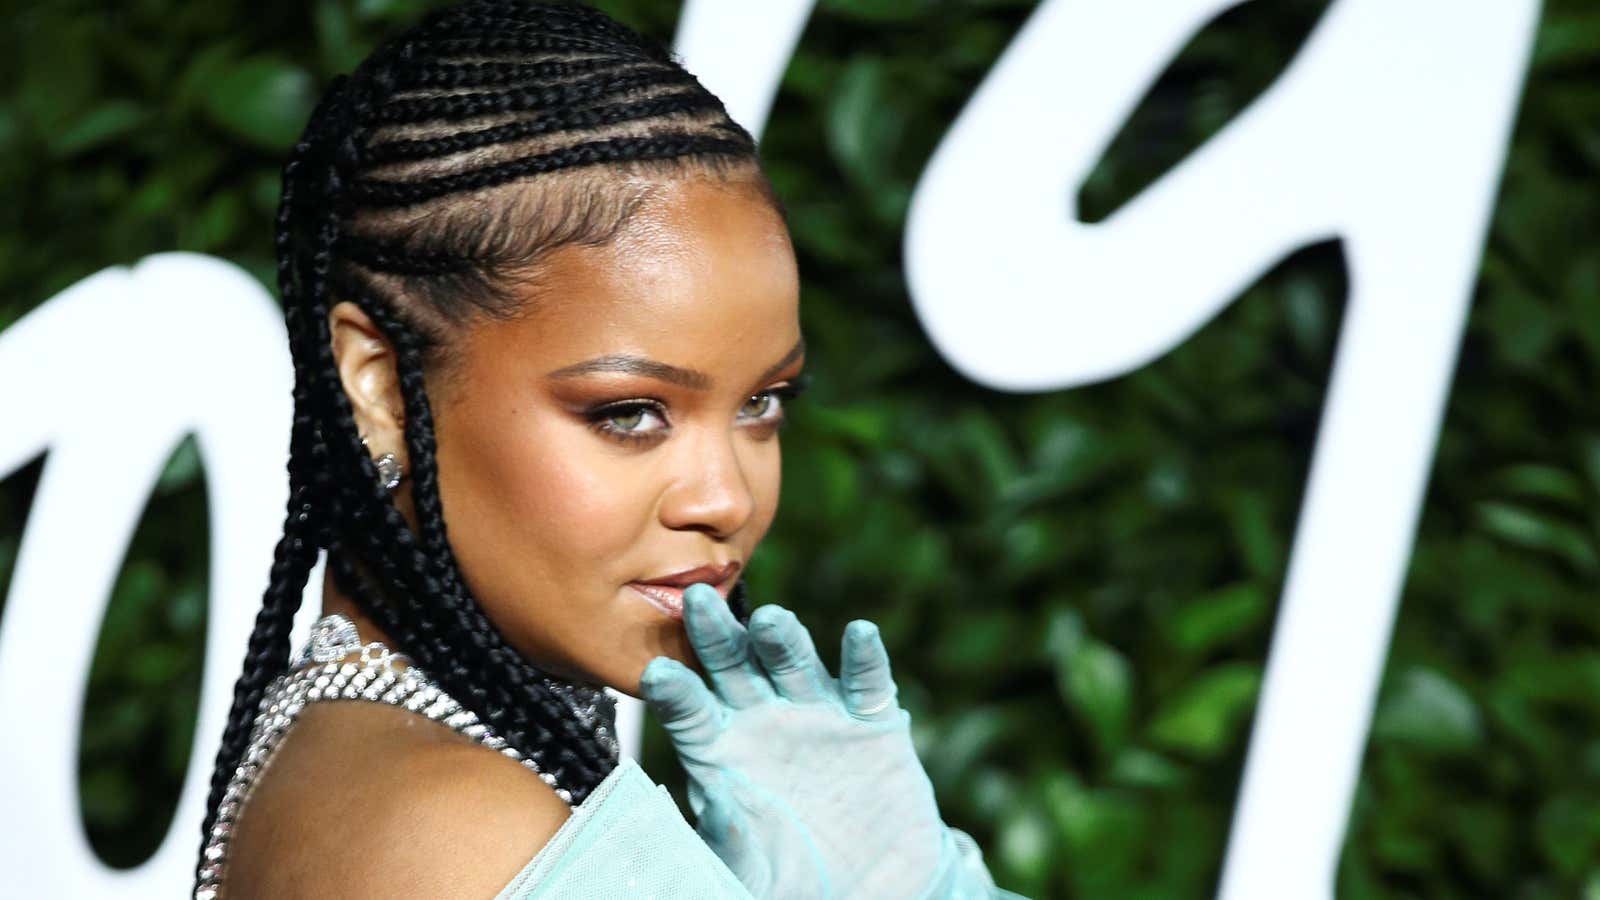 Rihanna and LVMH Team UP With Potential To Create Dynamic, People